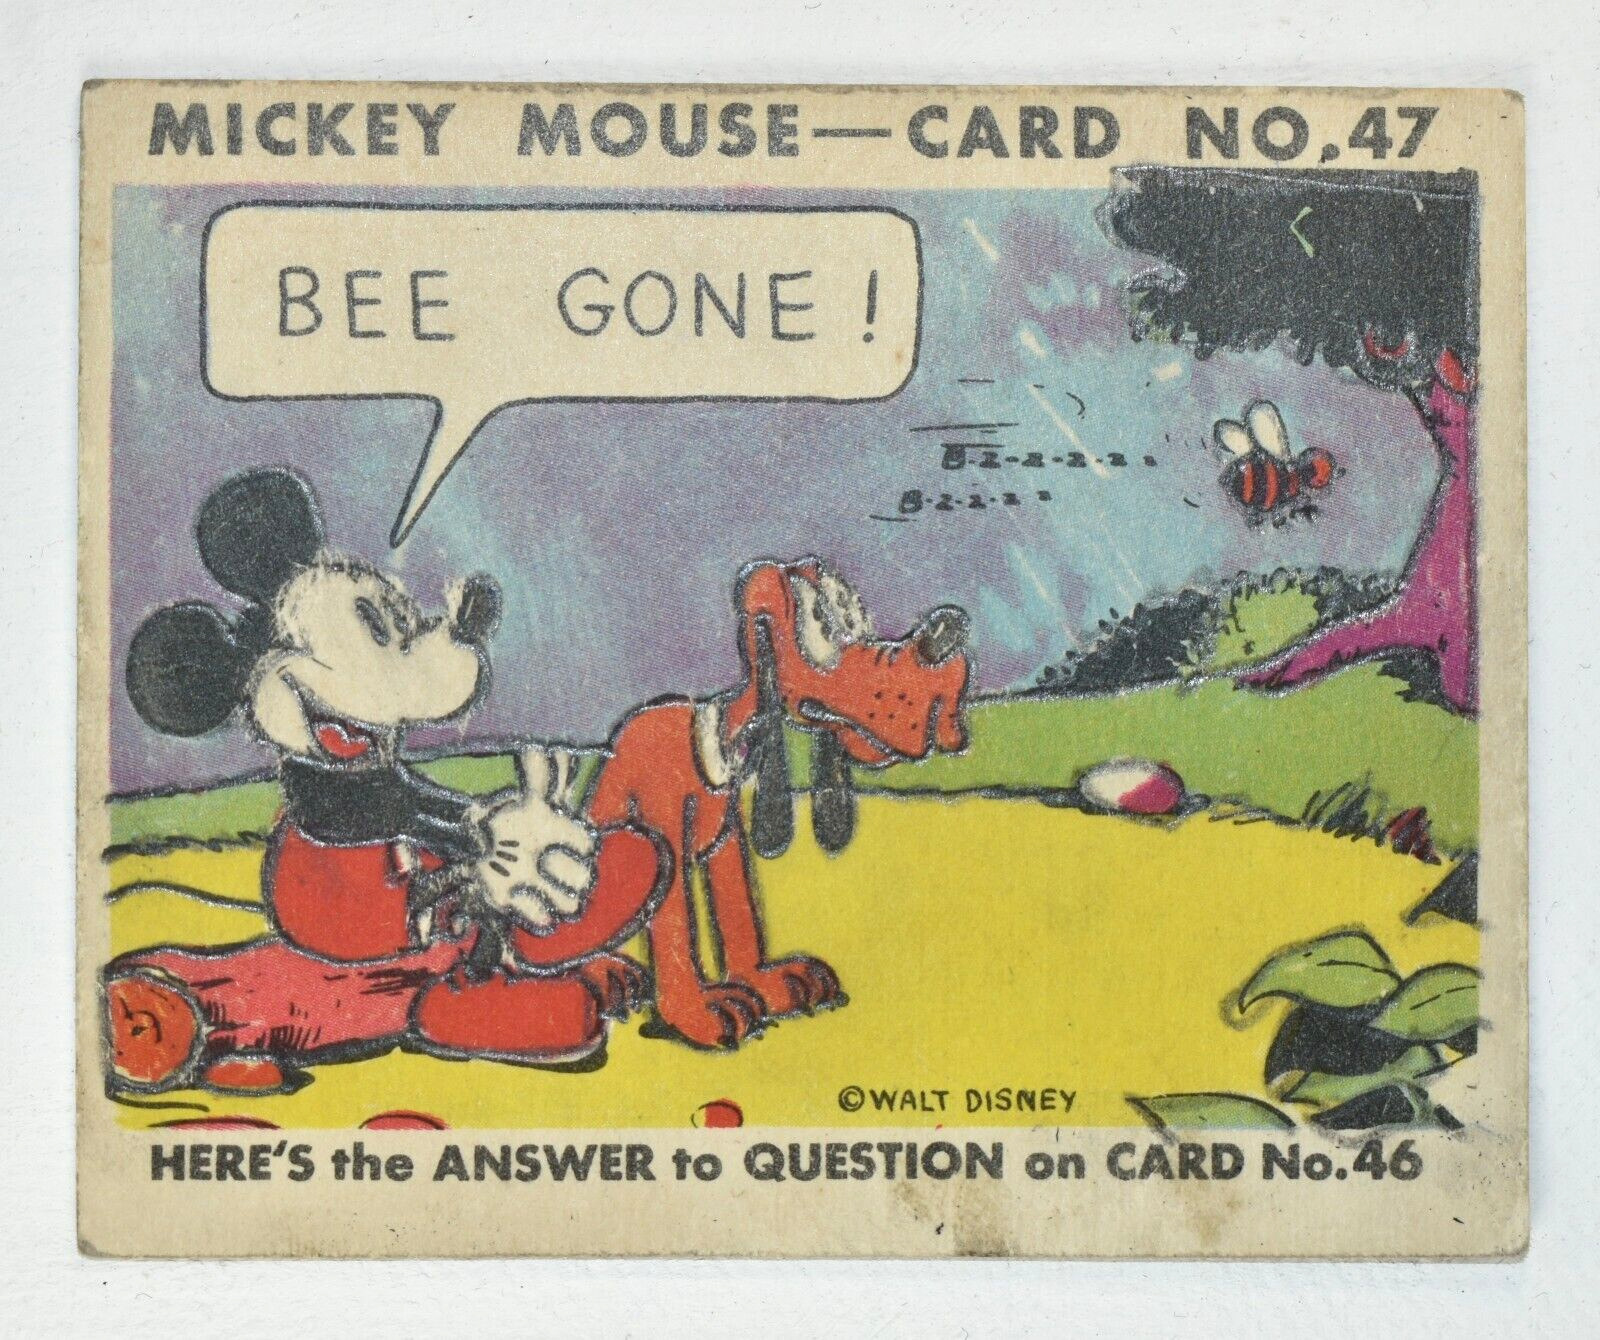 MICKEY MOUSE BUBBLE GUM TRADING CARD #47 R89, 1935